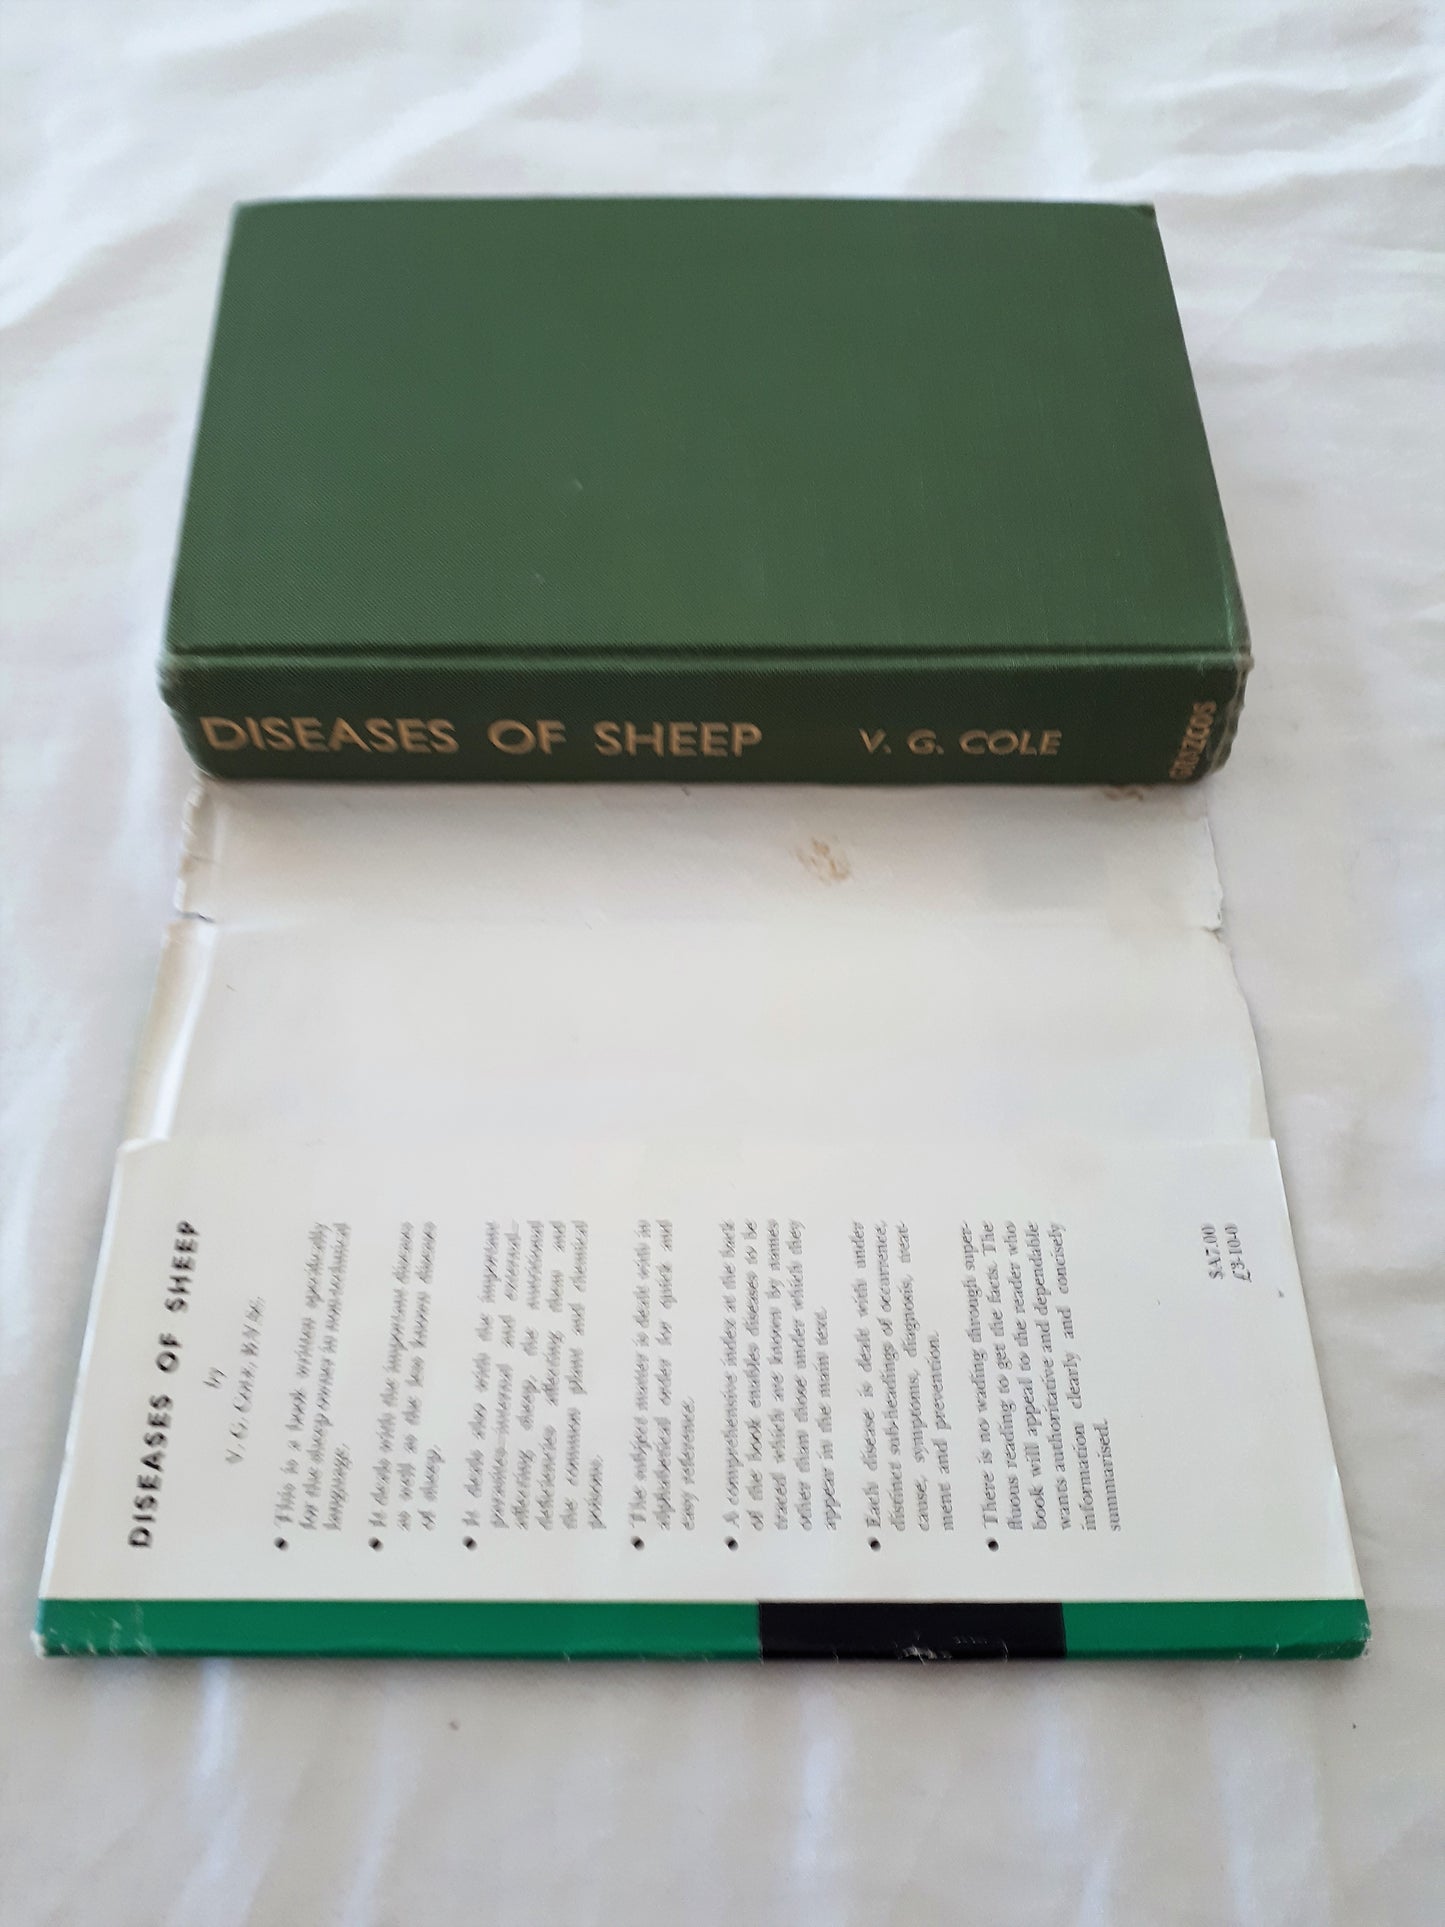 Diseases of Sheep by V. G. Cole